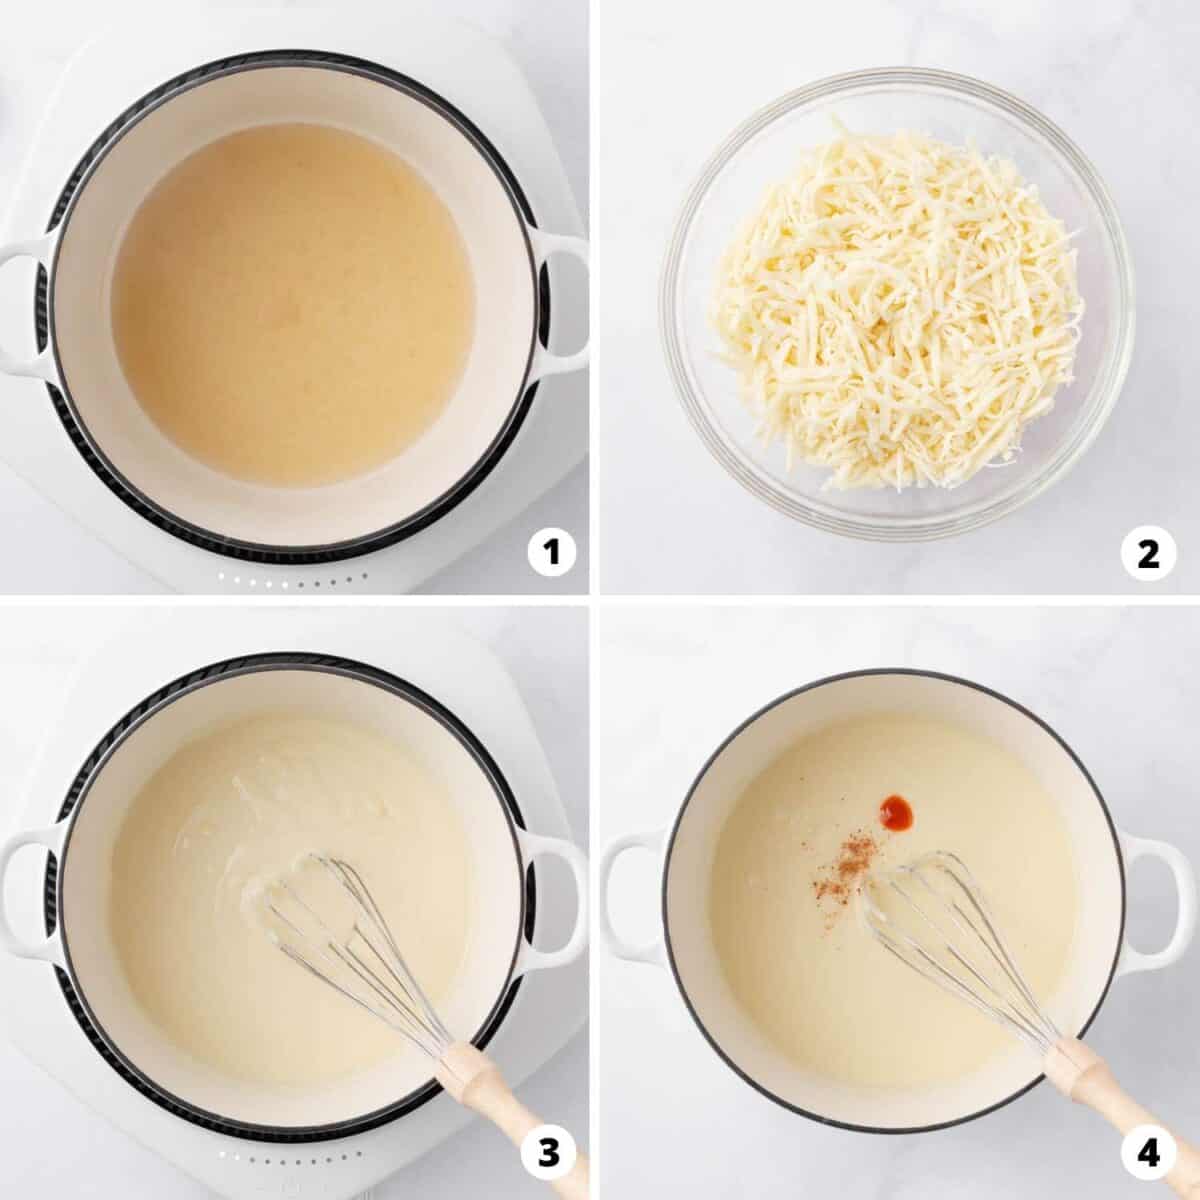 Showing how to make cheese fondue in a 4 step collage.